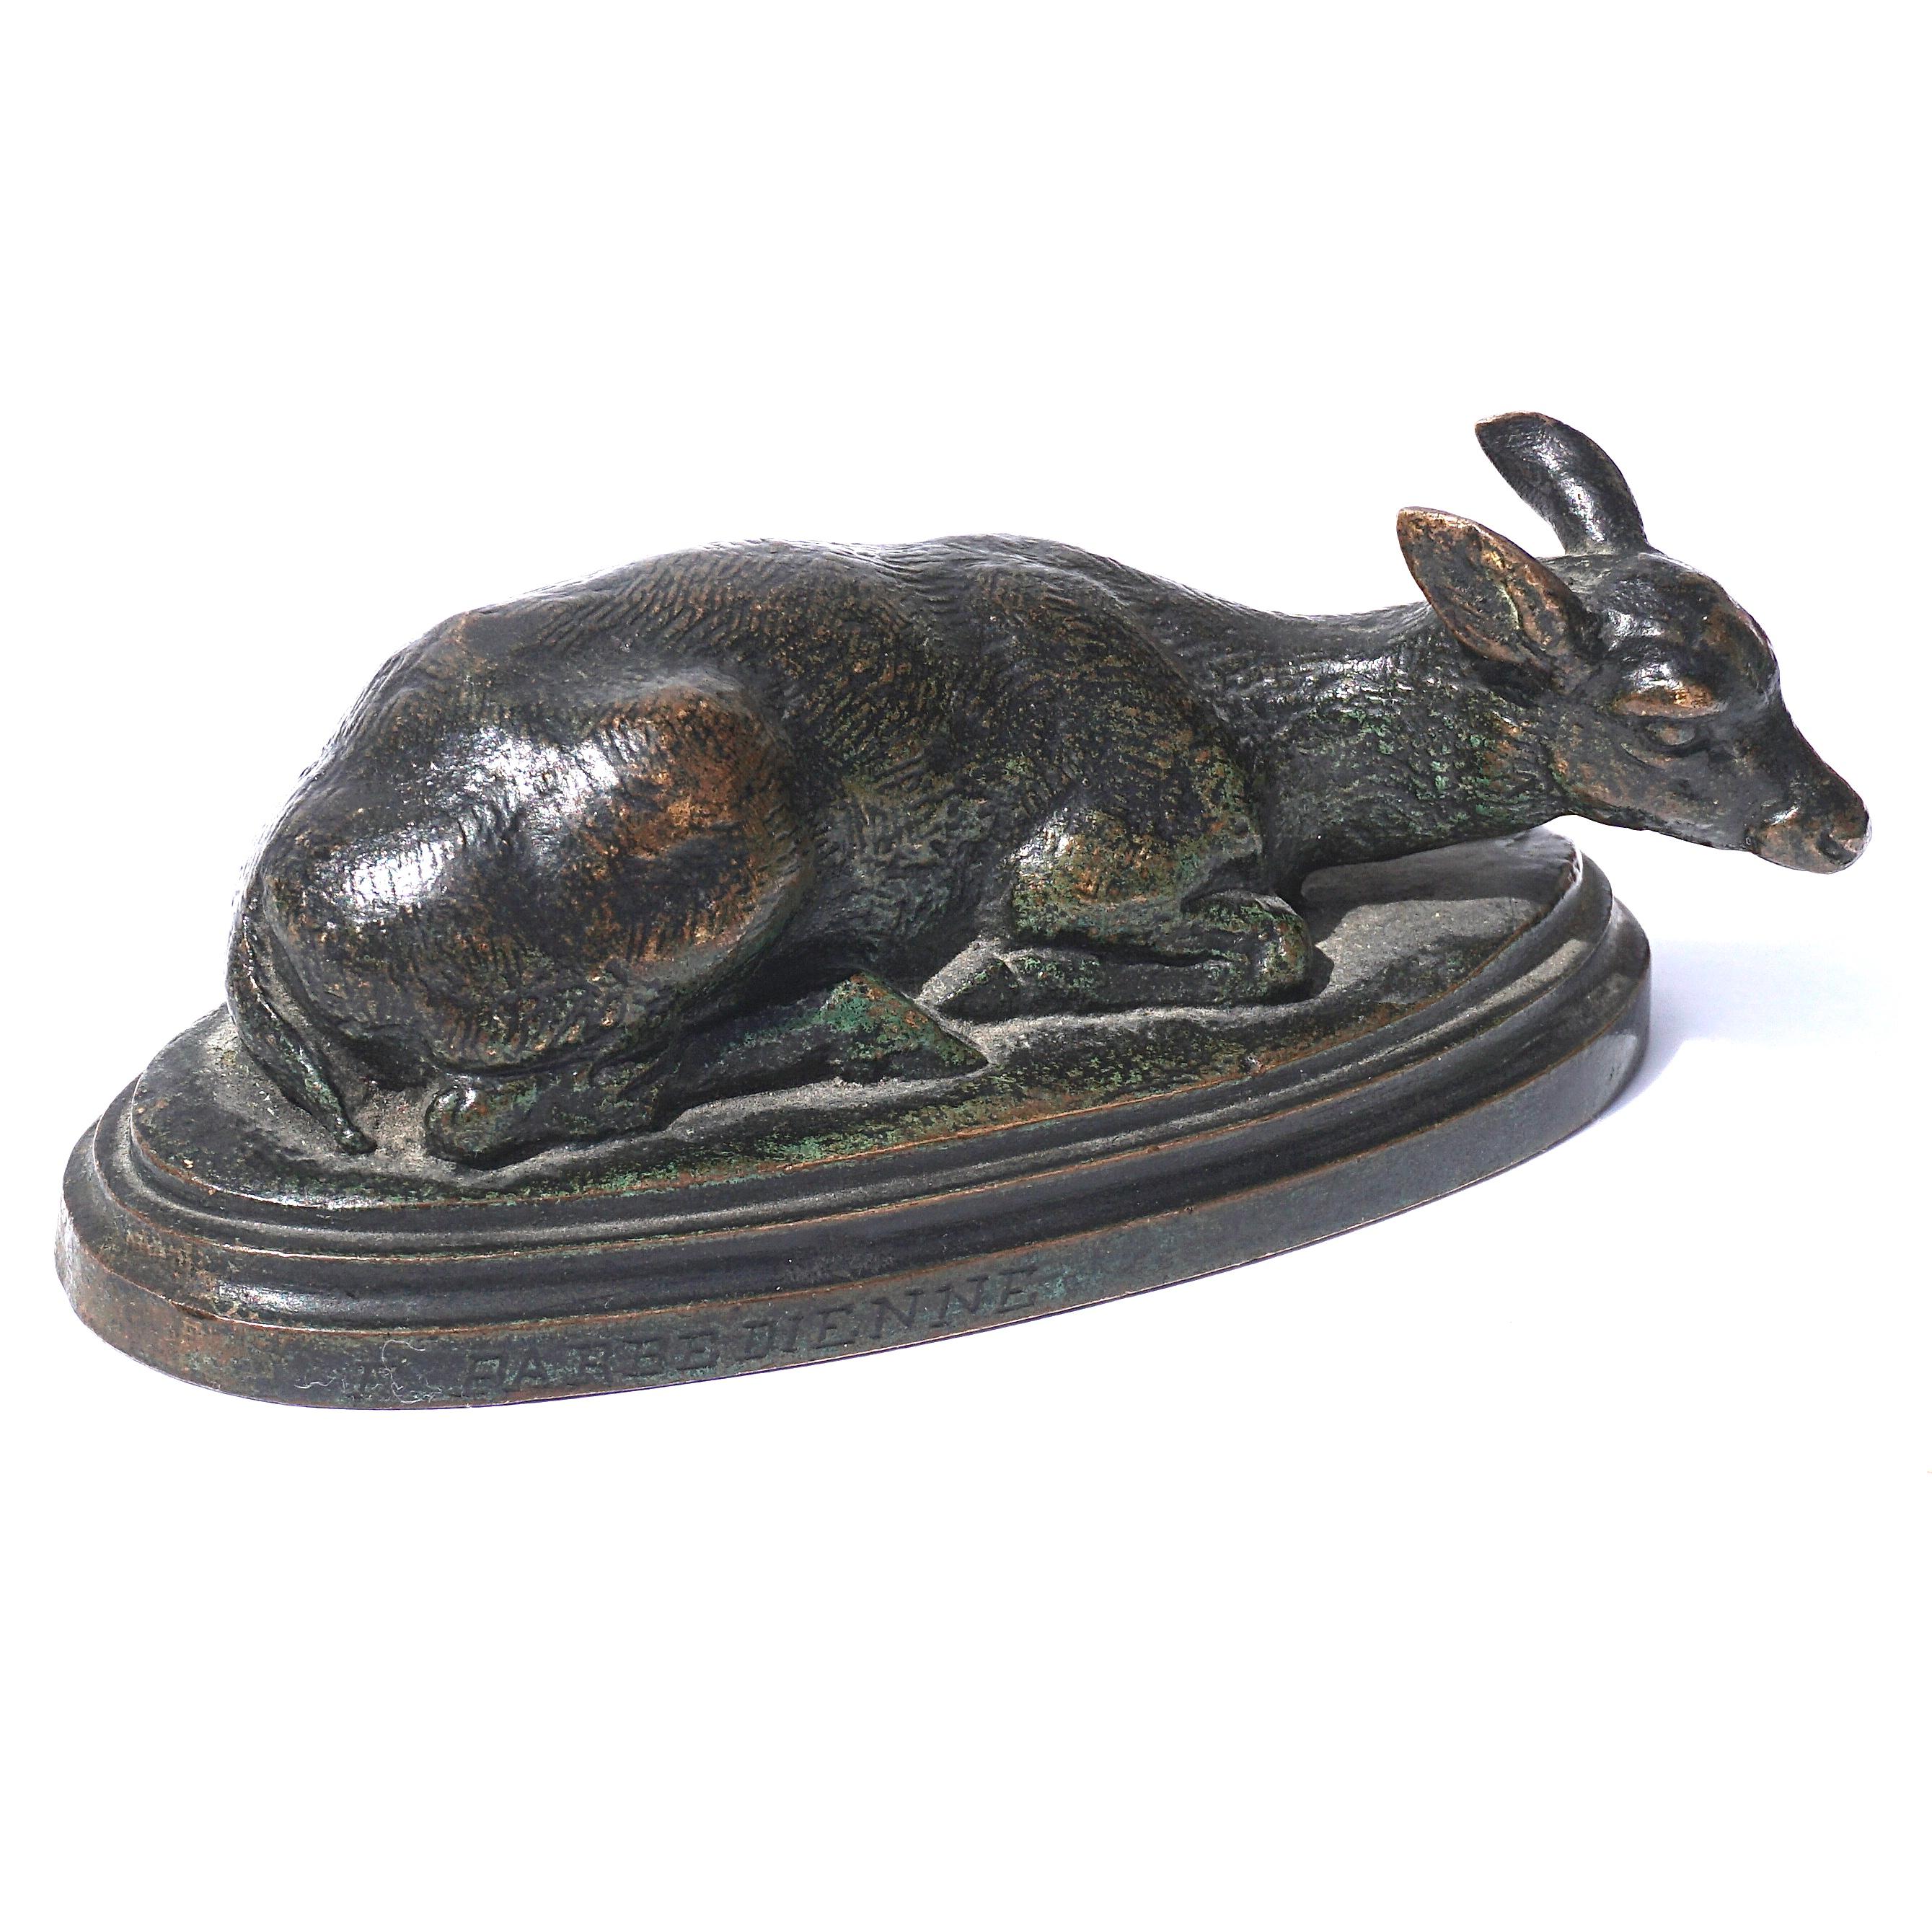 Antoine Louis Barye Reclining Doe bronze with green and brown patina cast by F. Barbedienne circa 1880. Signed “BARYE” and :F. BARBEDIENNE”. Underside with brace marked “B” and numbers 1195.

Measures: Width 3.5 Inches, height 1.5 inches, depth 1.7